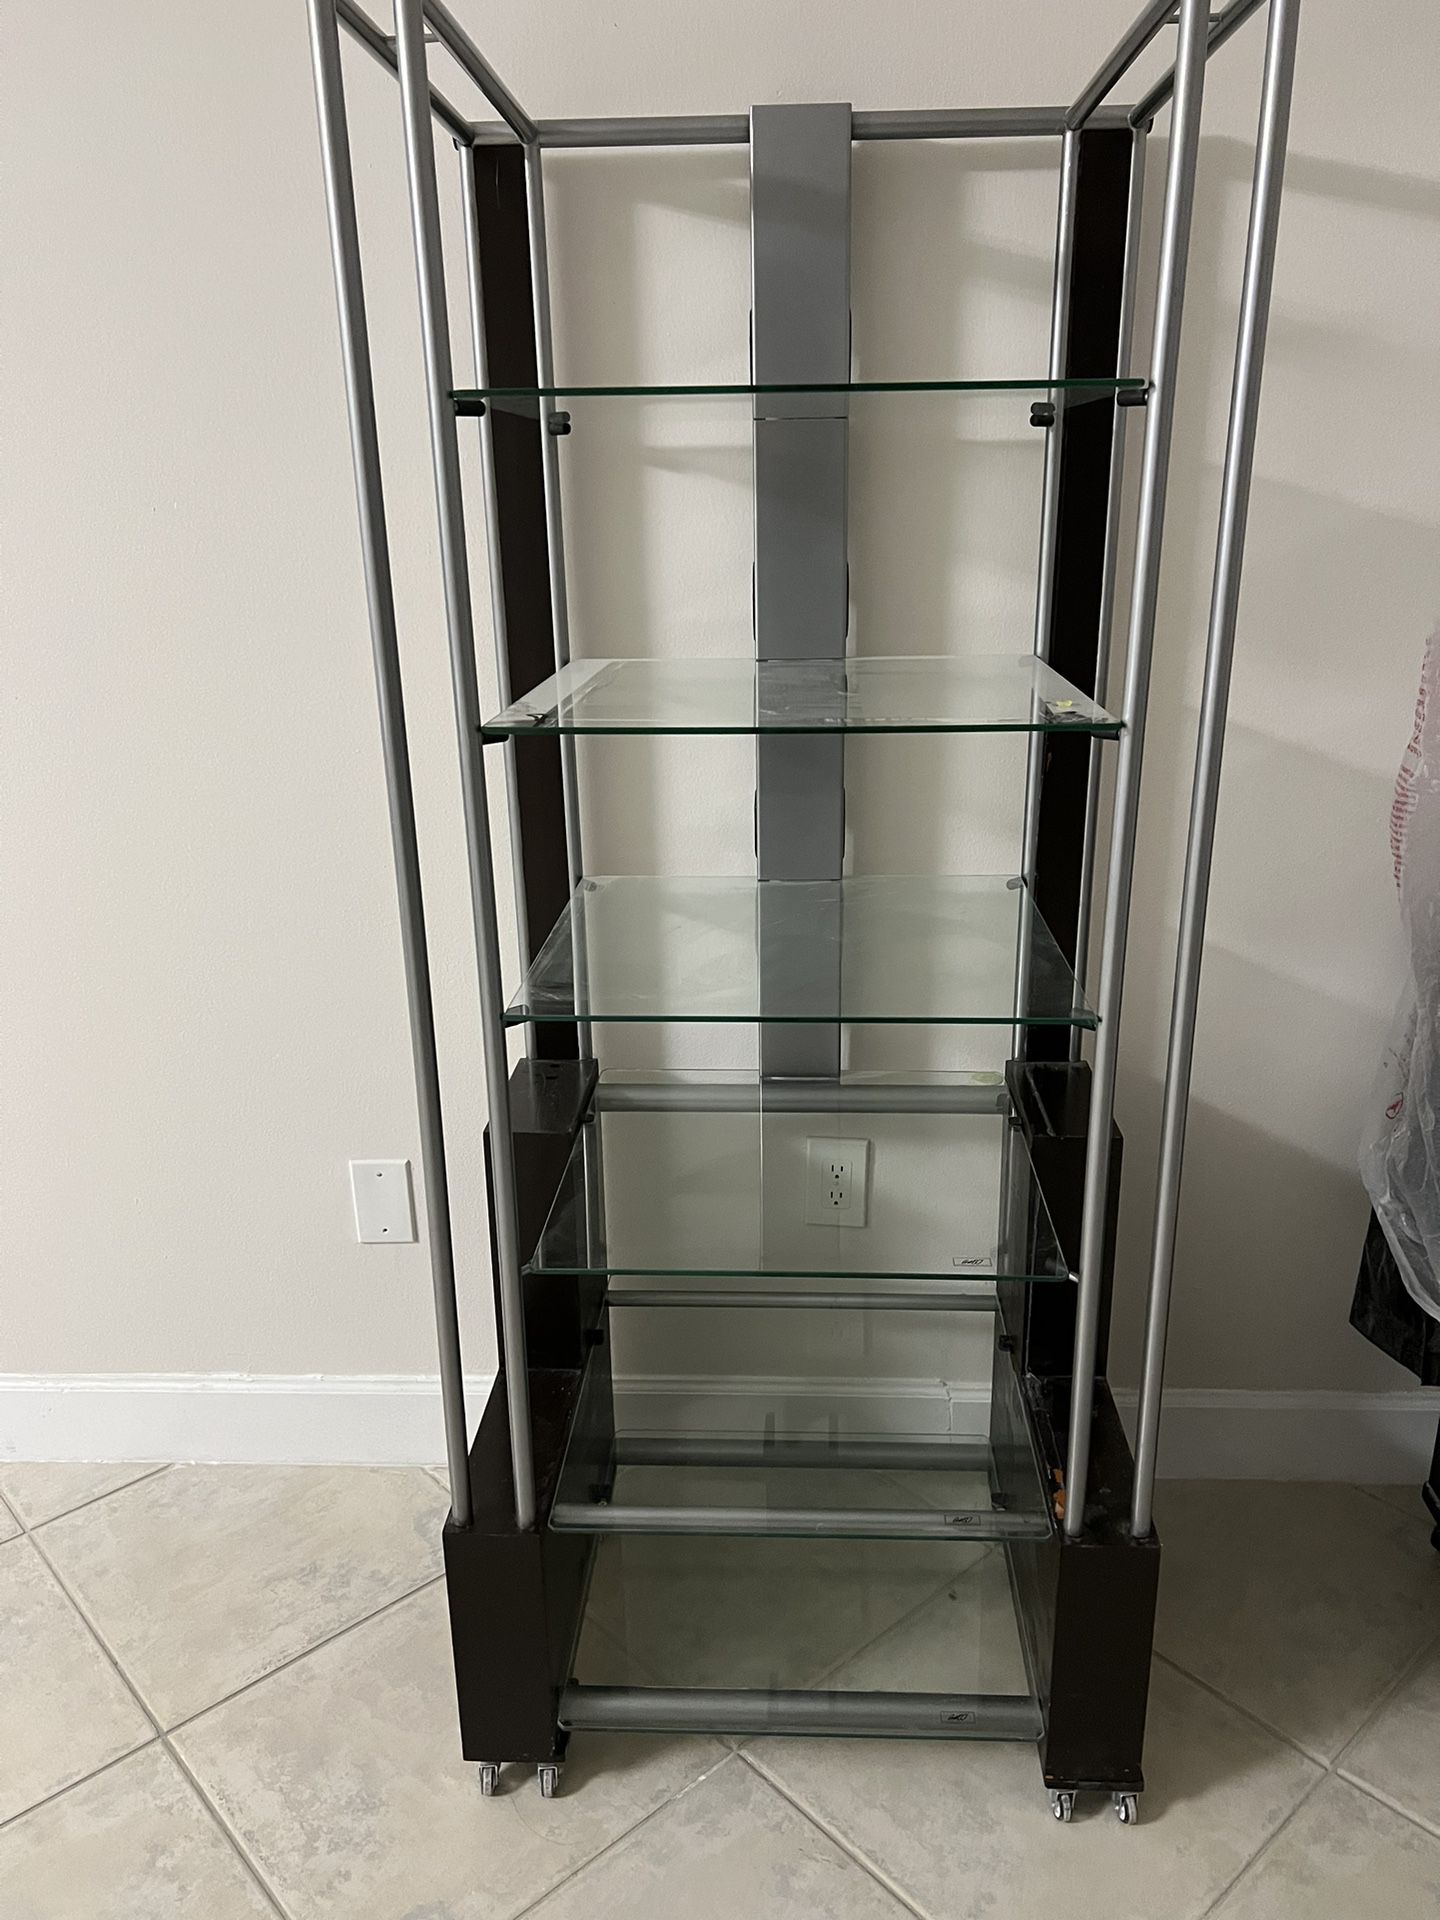 Wood and Stainless Steel Cabinet with Glass Shelves